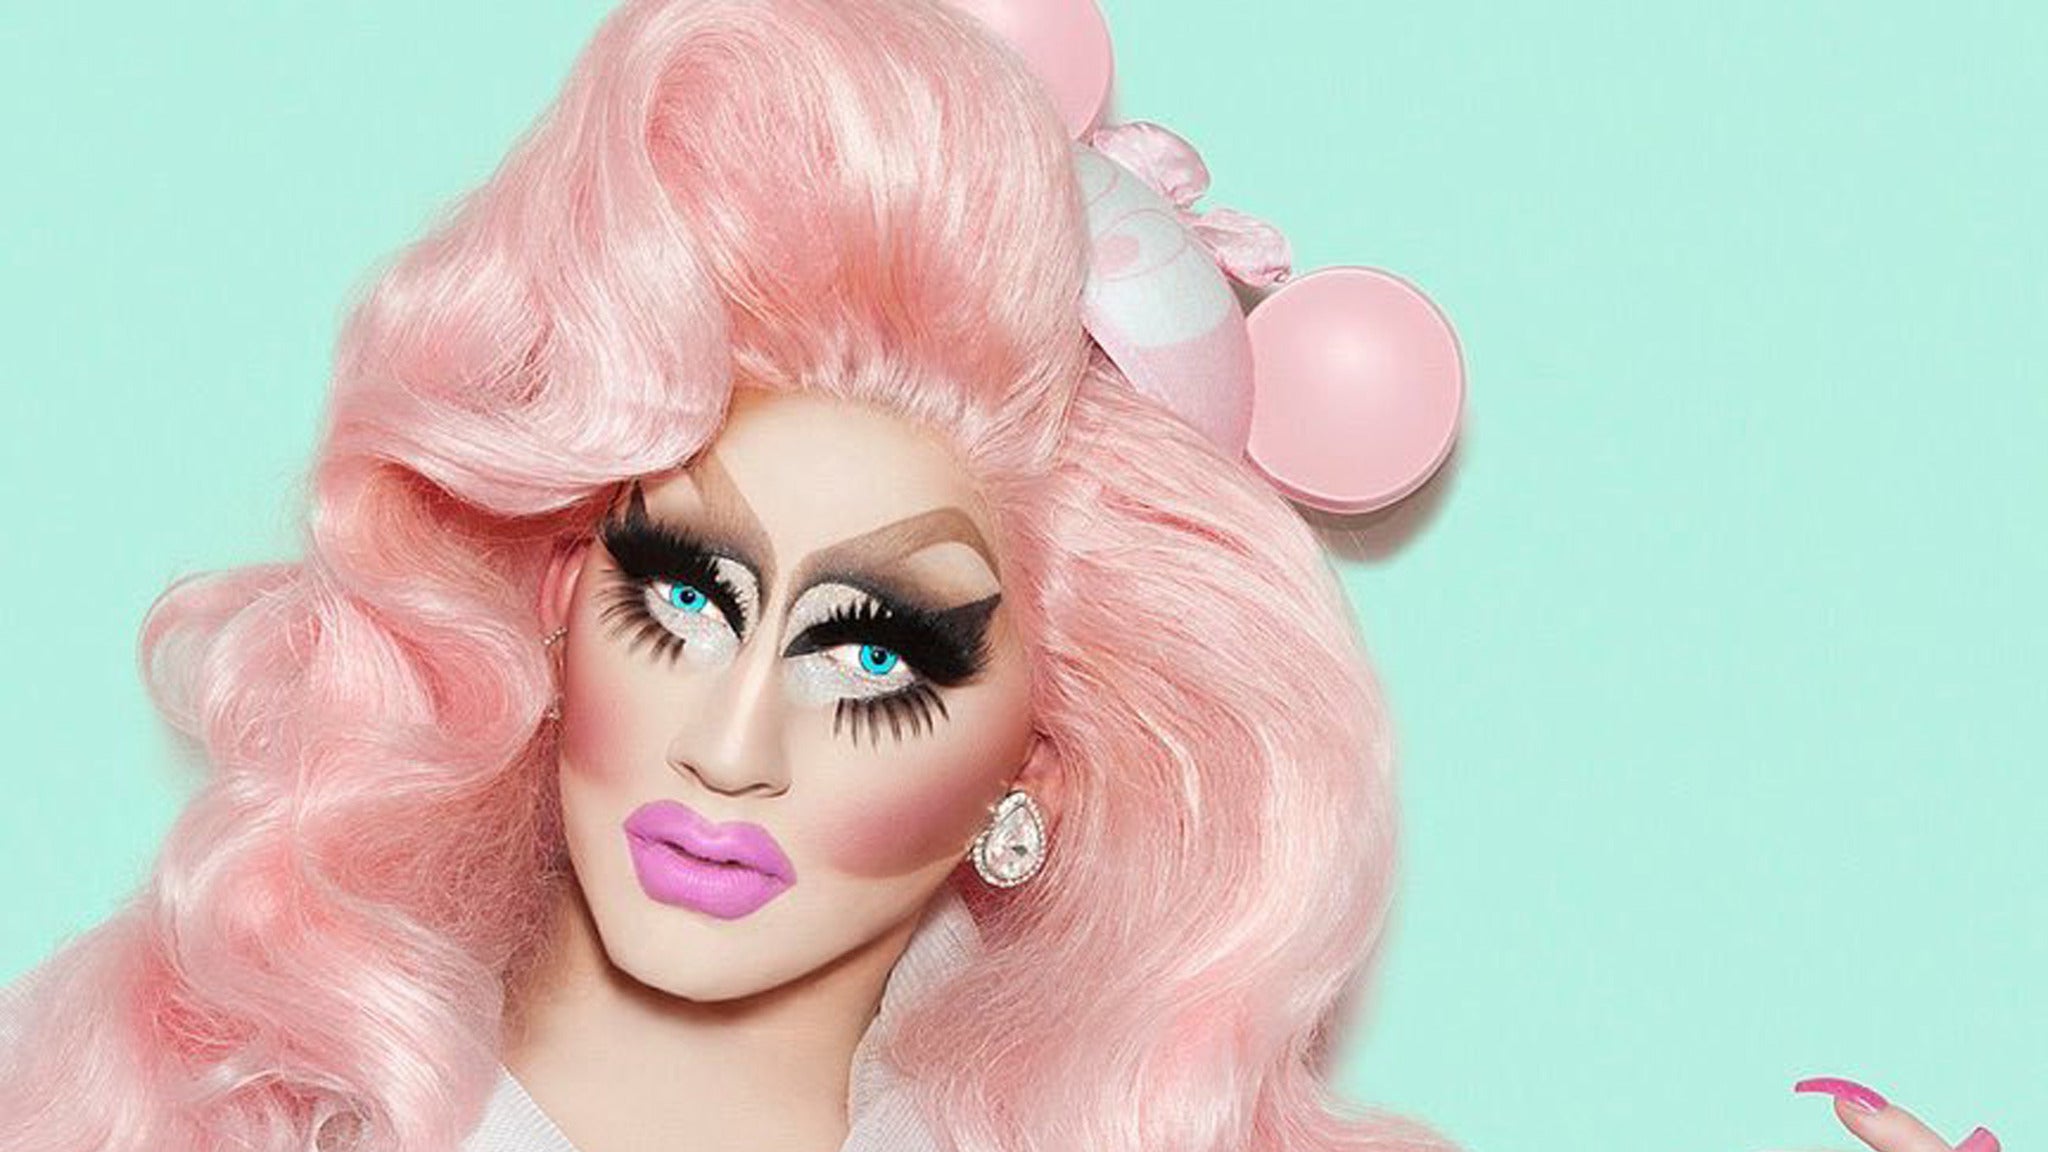 Trixie Mattel: Grown Up in Seattle promo photo for Official Platinum presale offer code